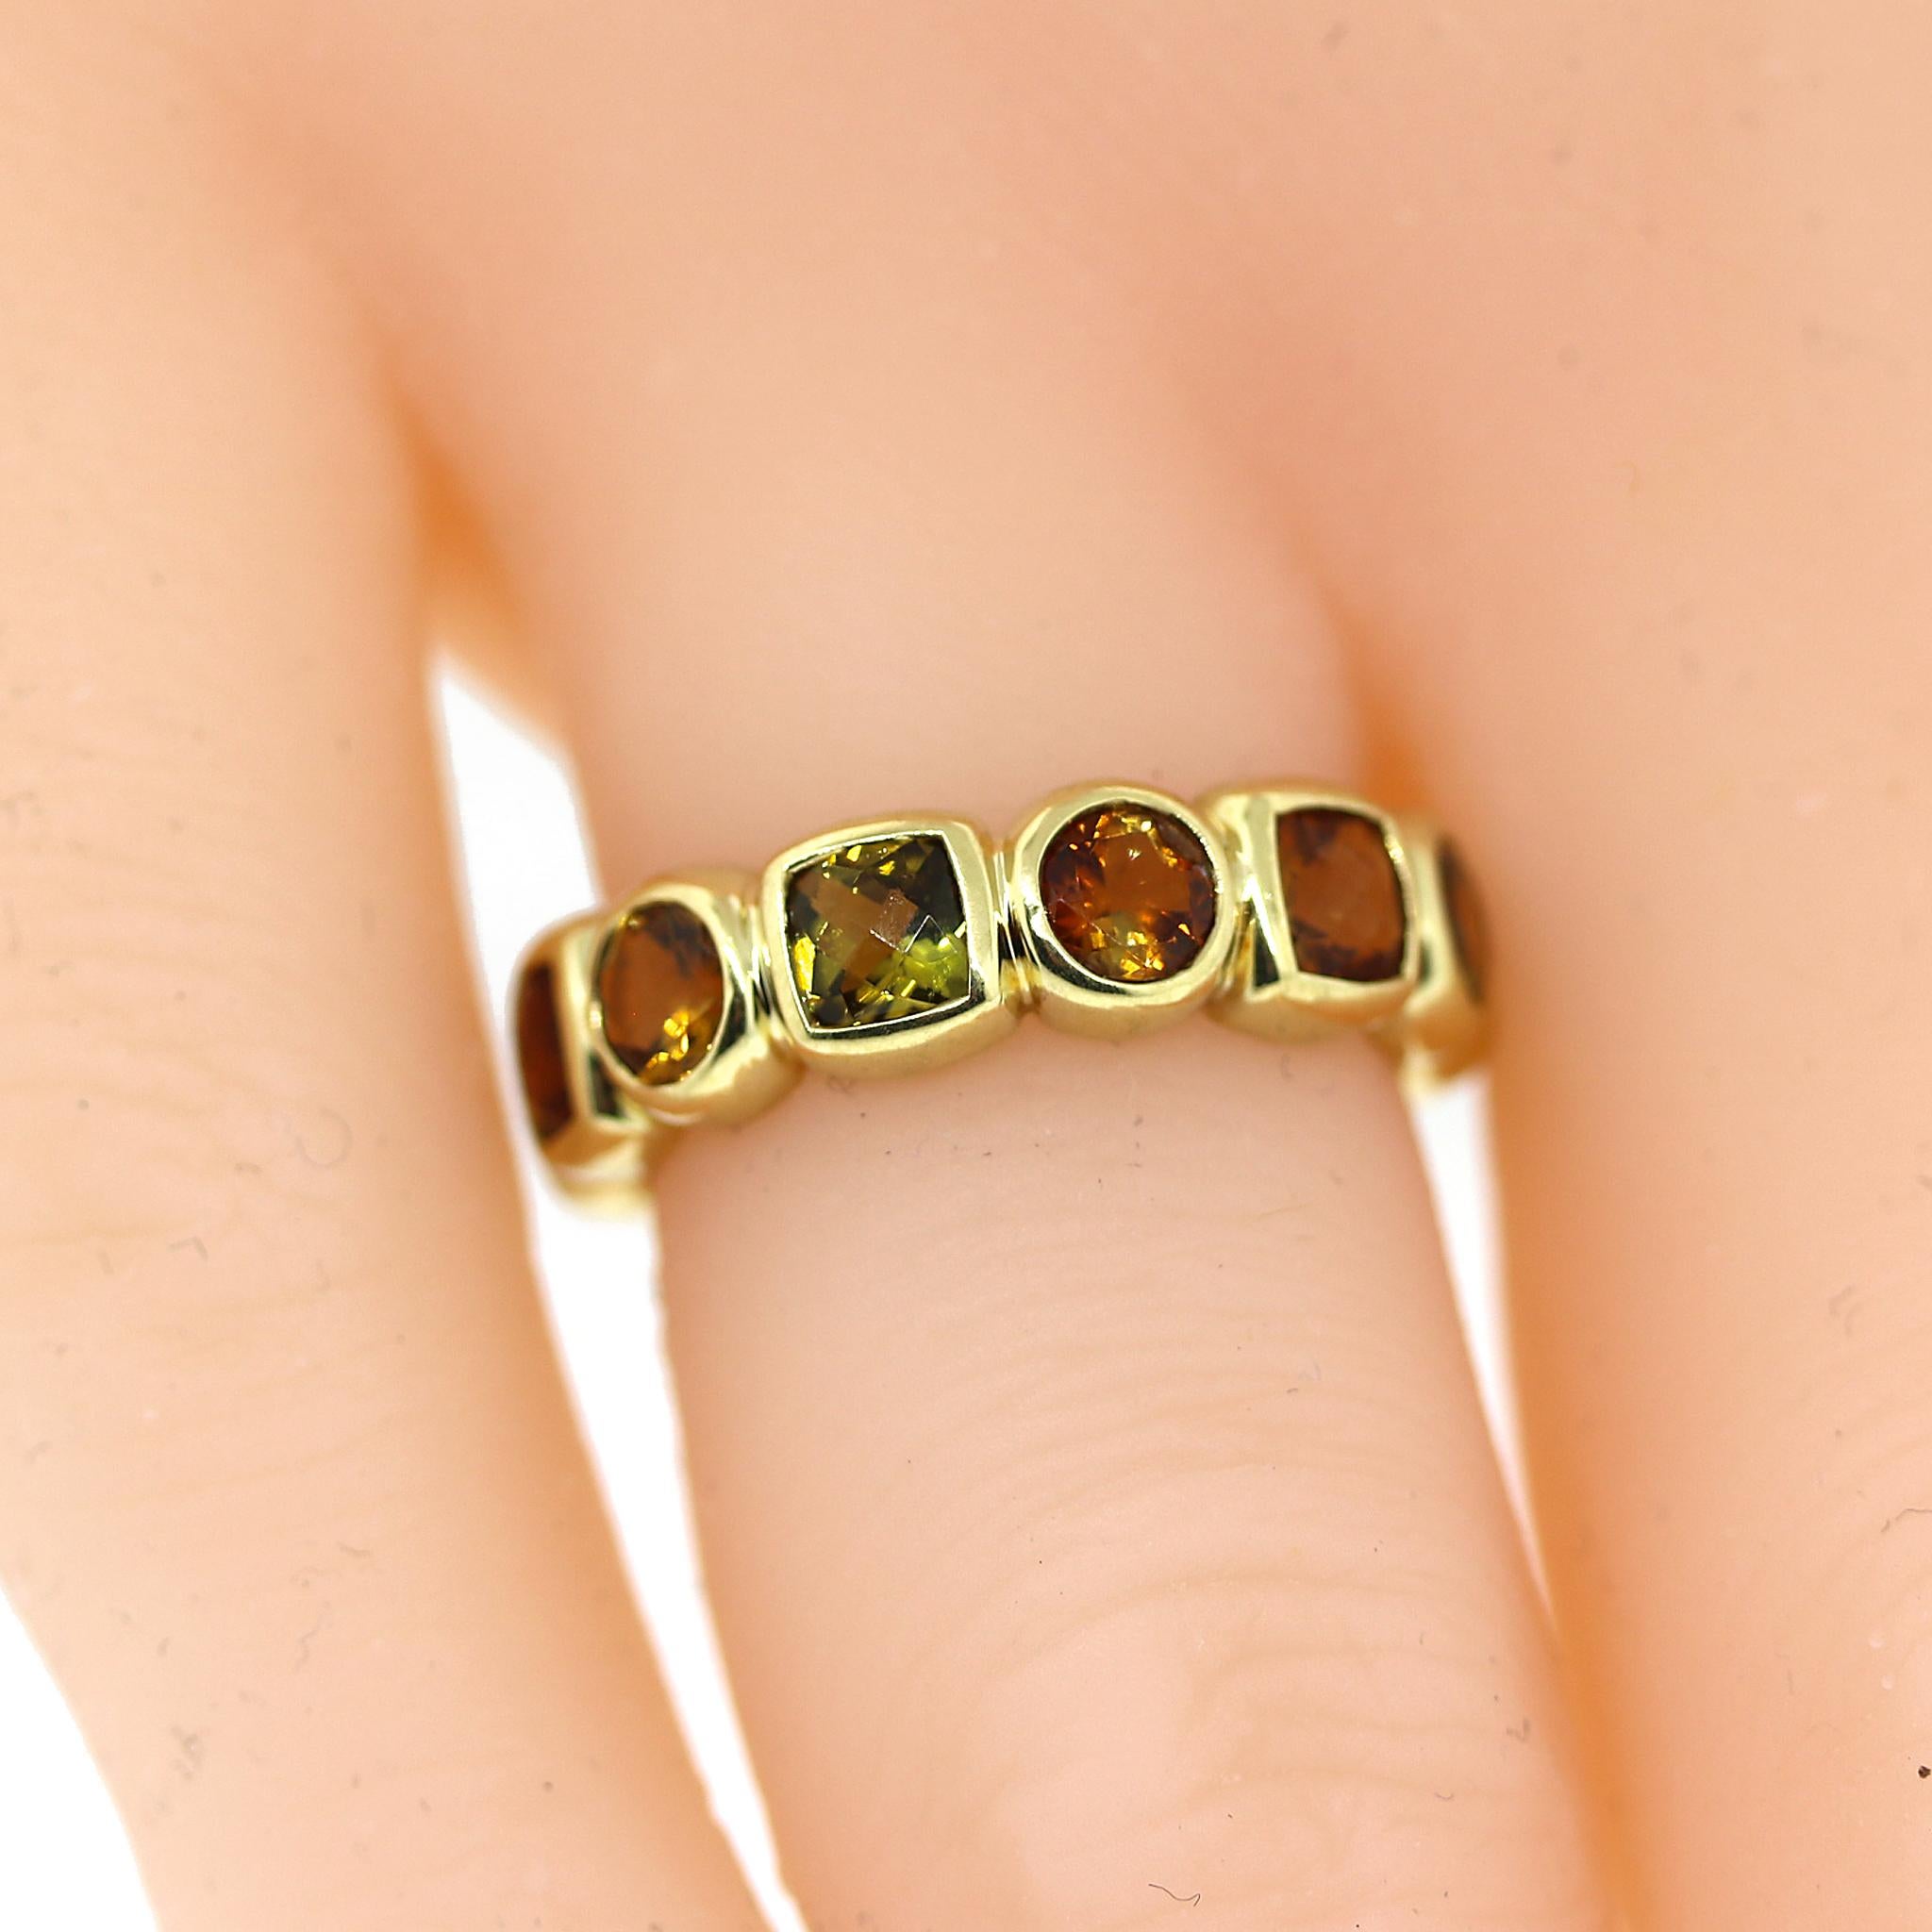 18 kt Yellow Gold
Ring Size: 5
Total Weight: 5.89 grams